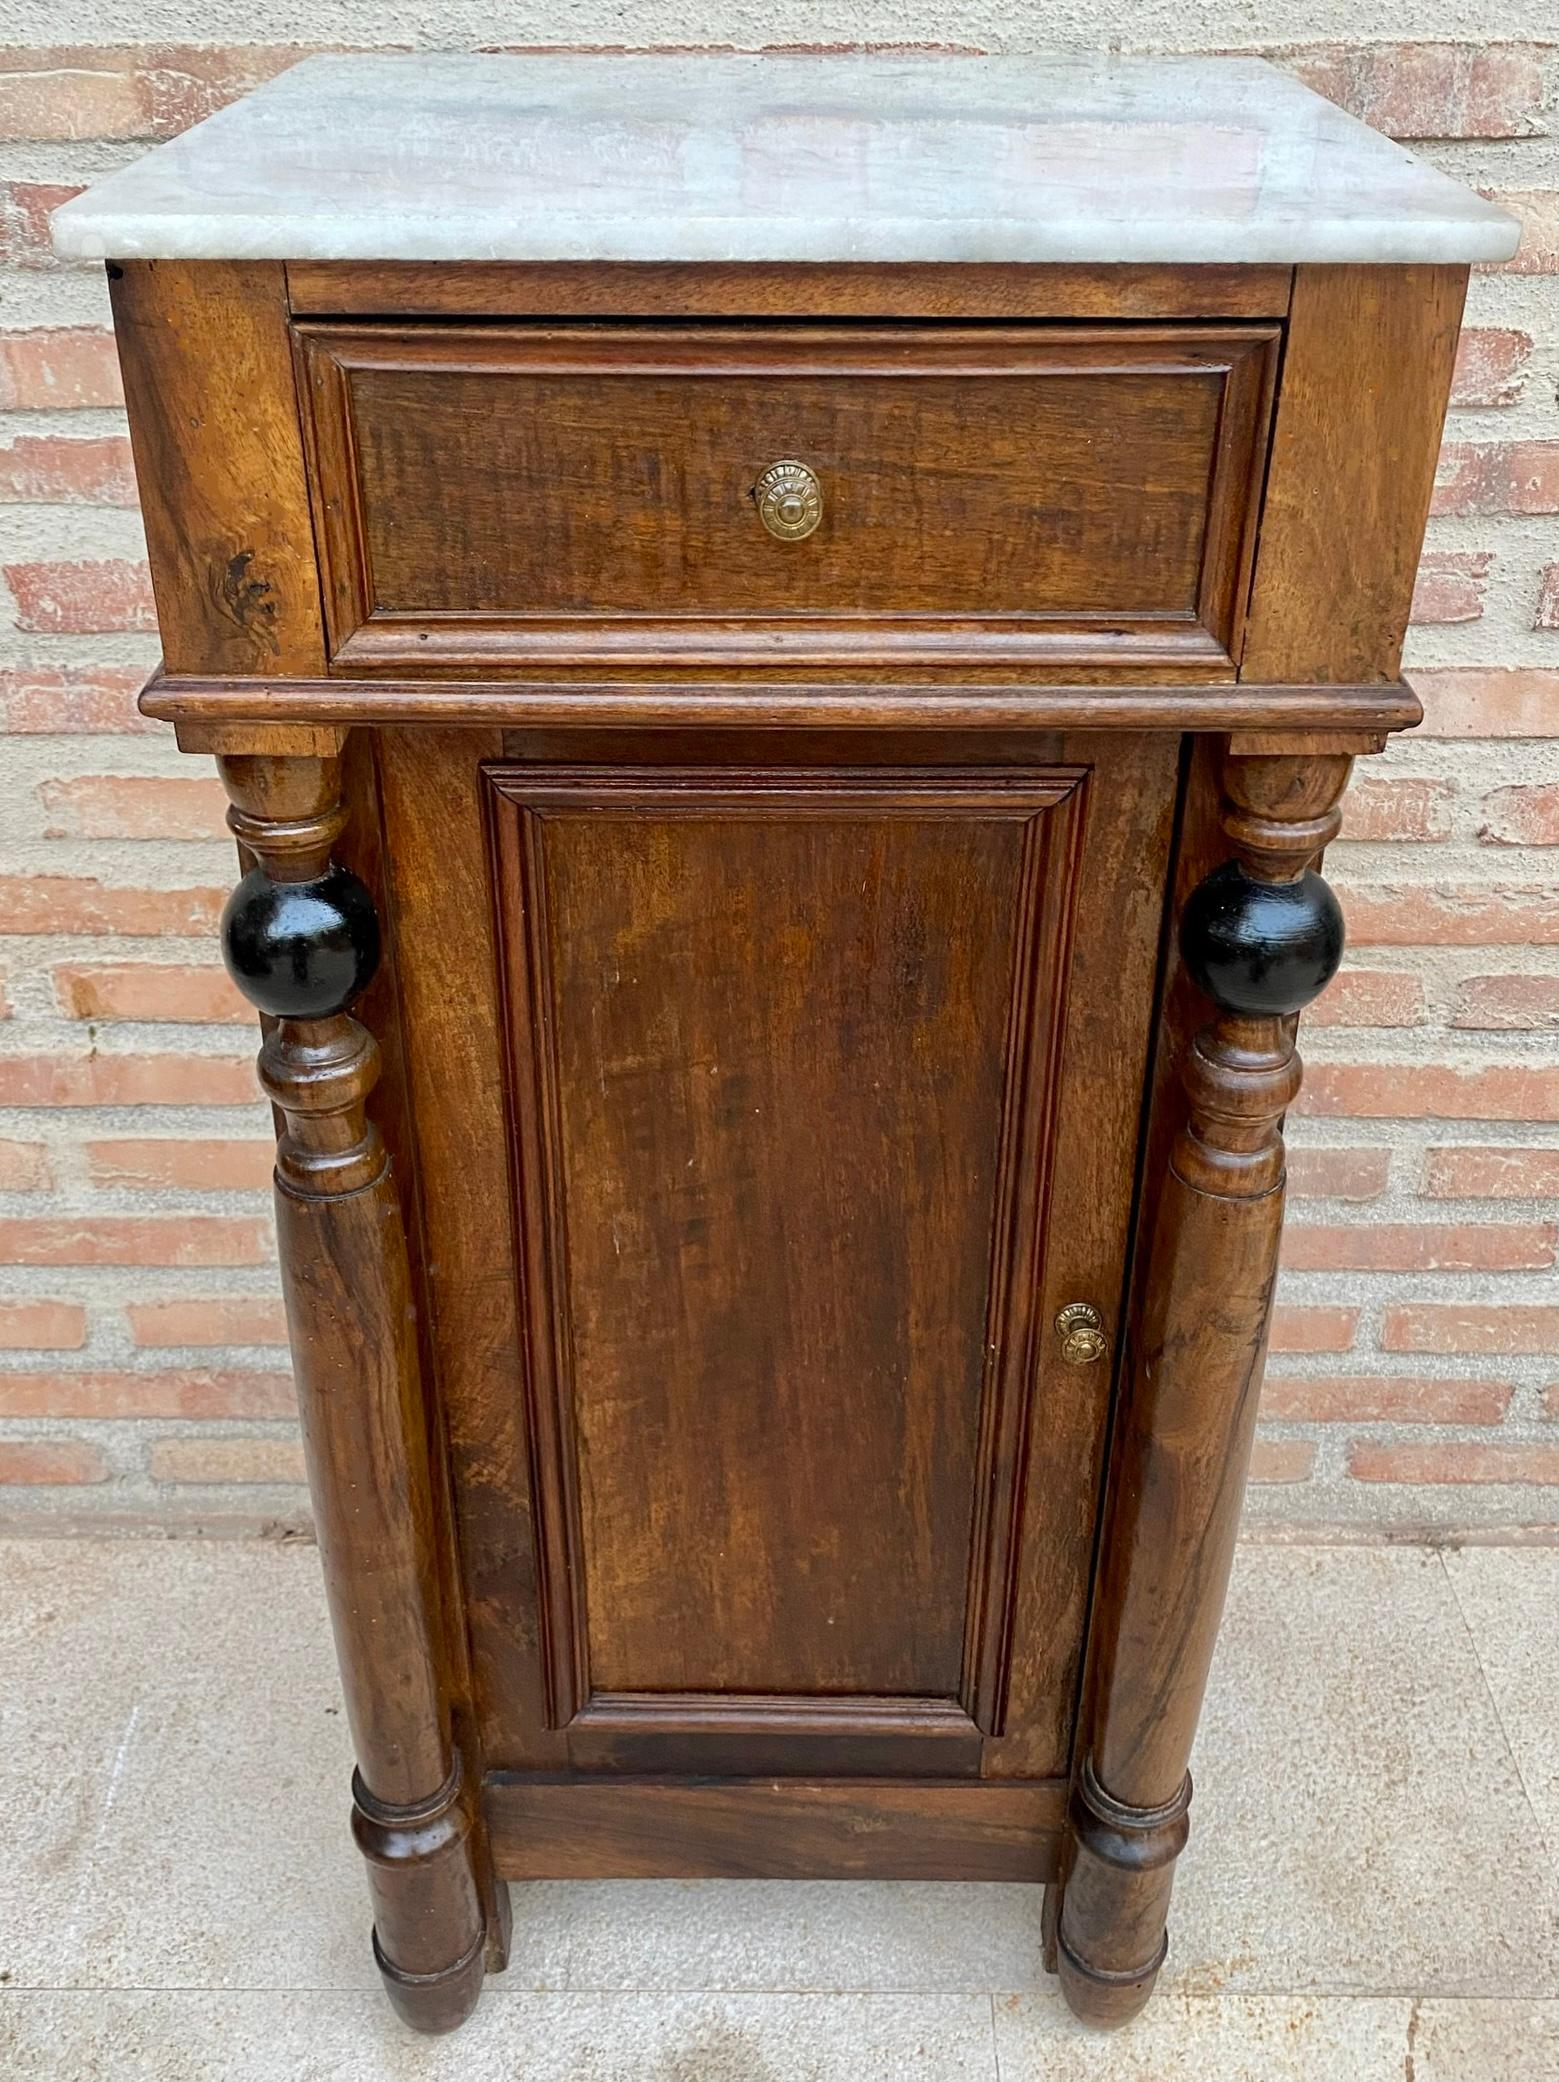 Pair of Early 20Th Century French Walnut Nightstands with One Drawer and Marble Top, 1920’s.